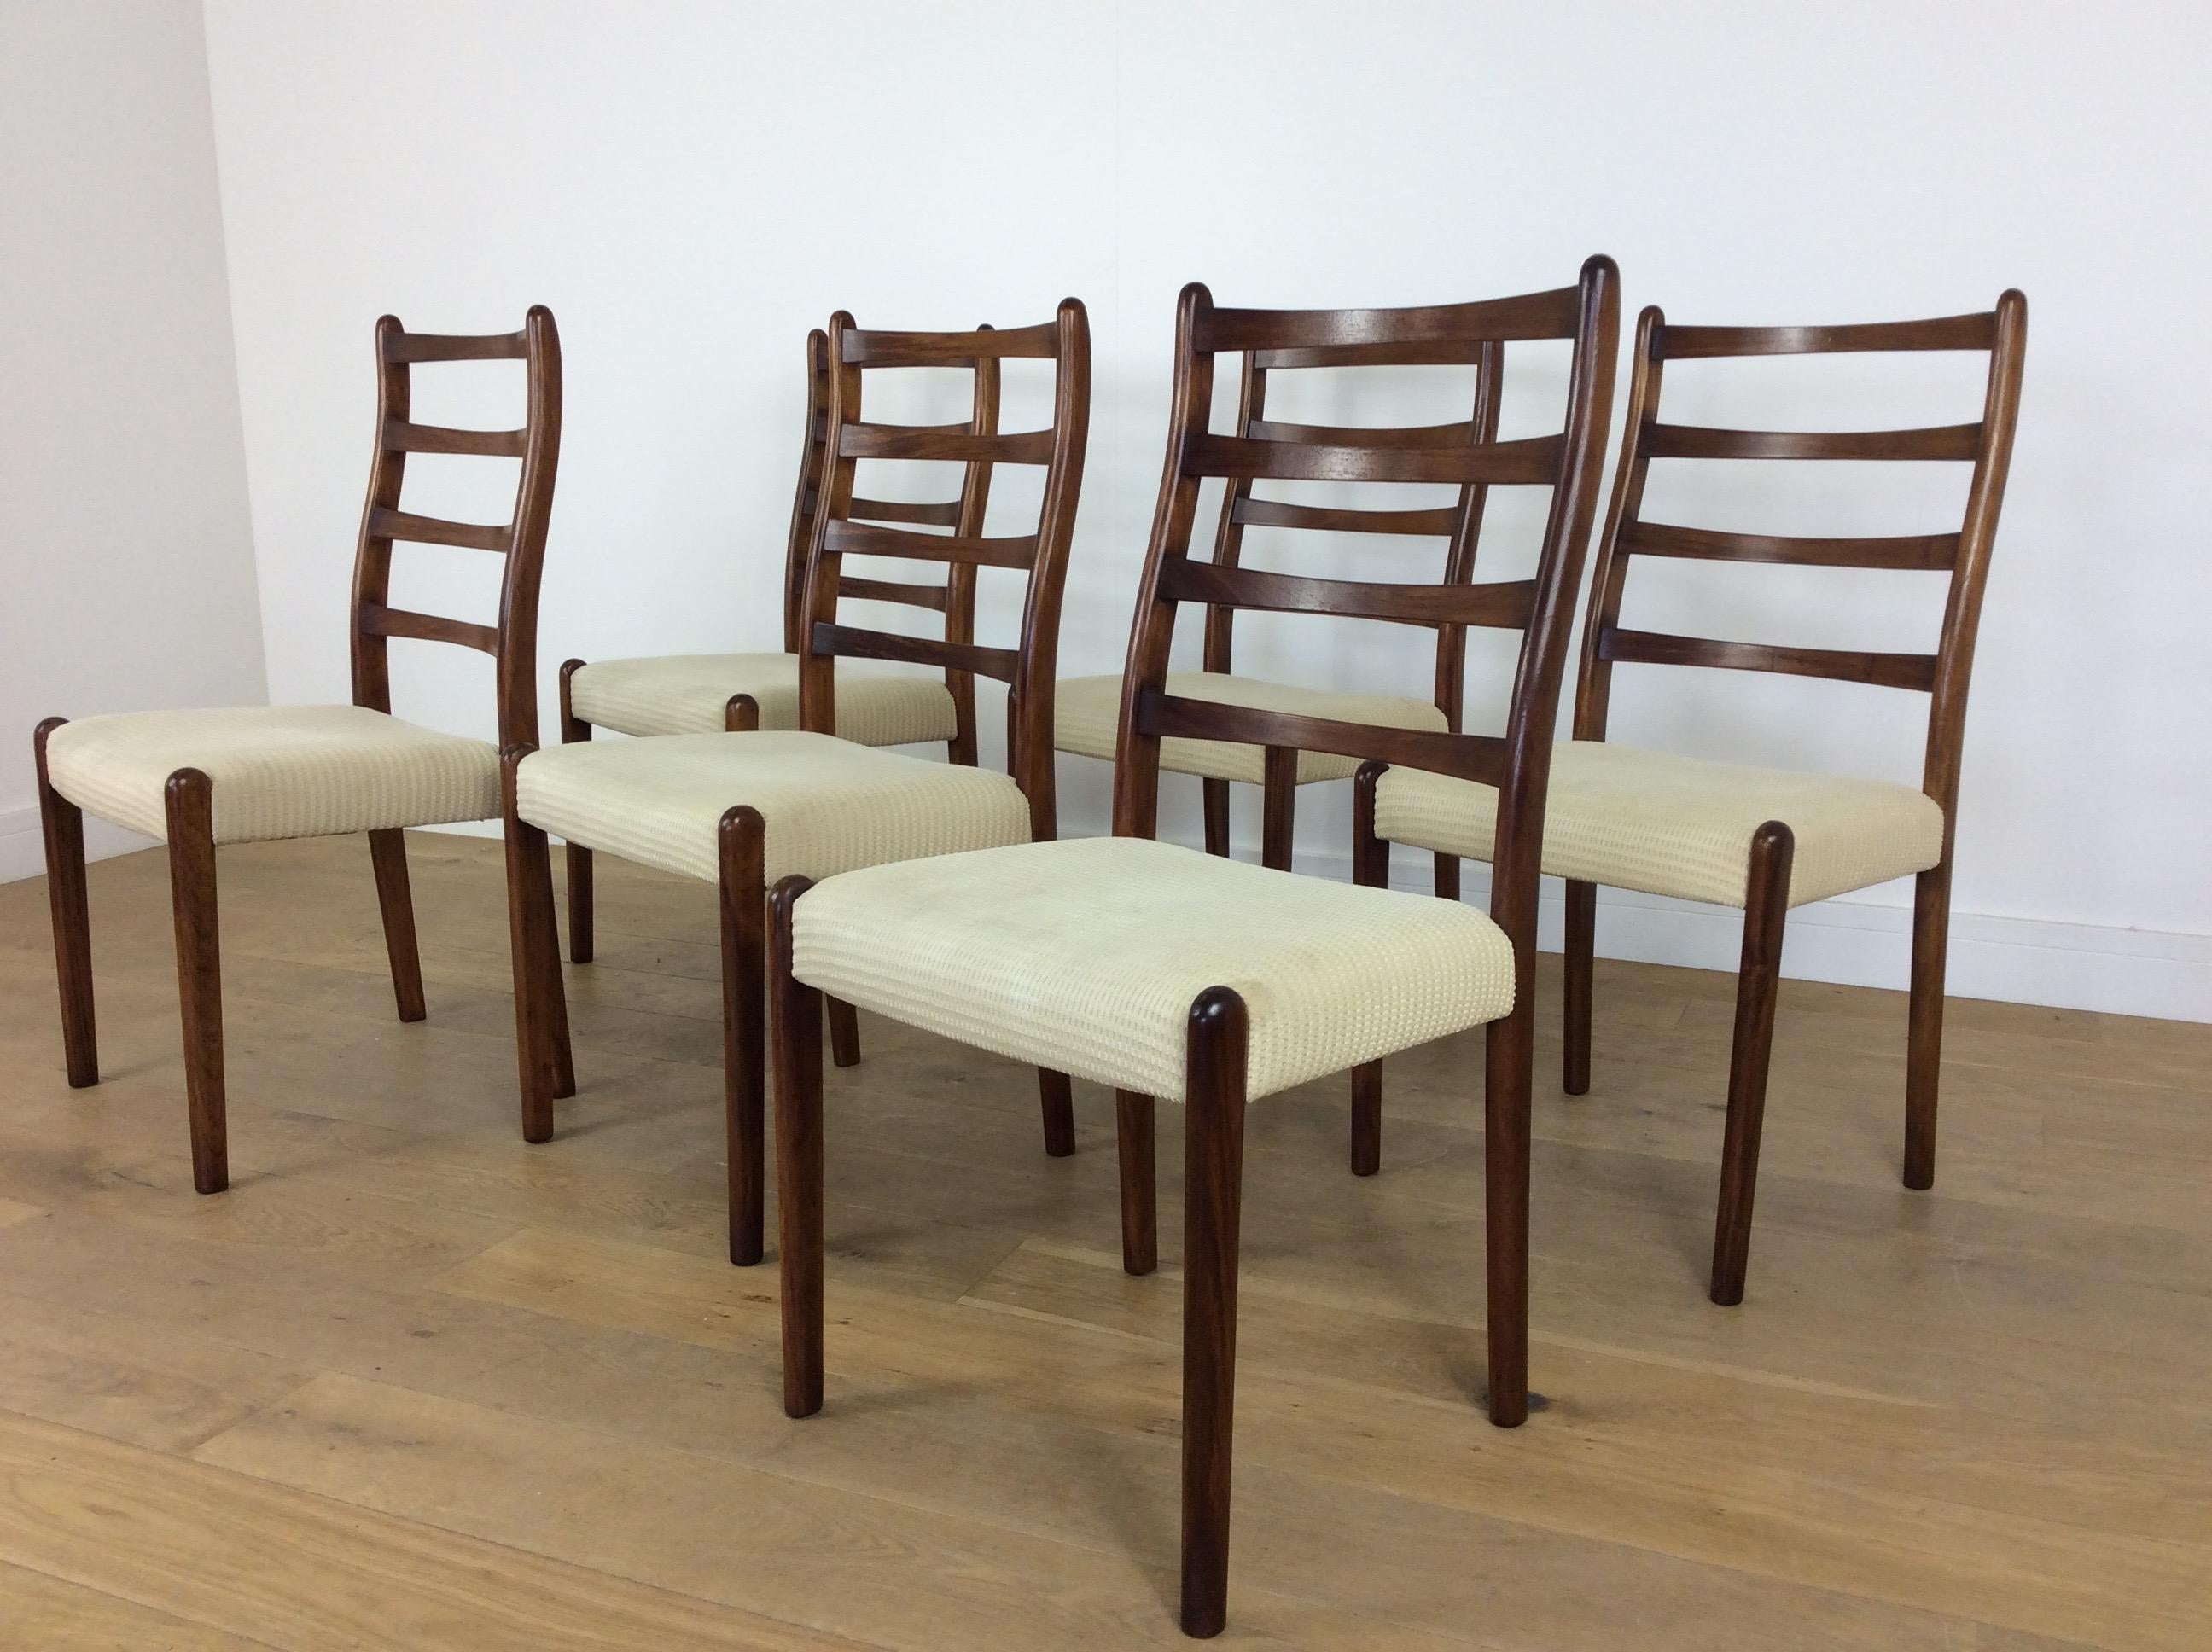 Midcentury dining chairs, set of six.
Midcentury rosewood ladder back dining chairs, upholstered in a cream fabric.
These are a very fine set of six midcentury high back chairs.
Measures: 96 cm H, 49 cm W, 45 cm D, seat height 46 cm, seat depth